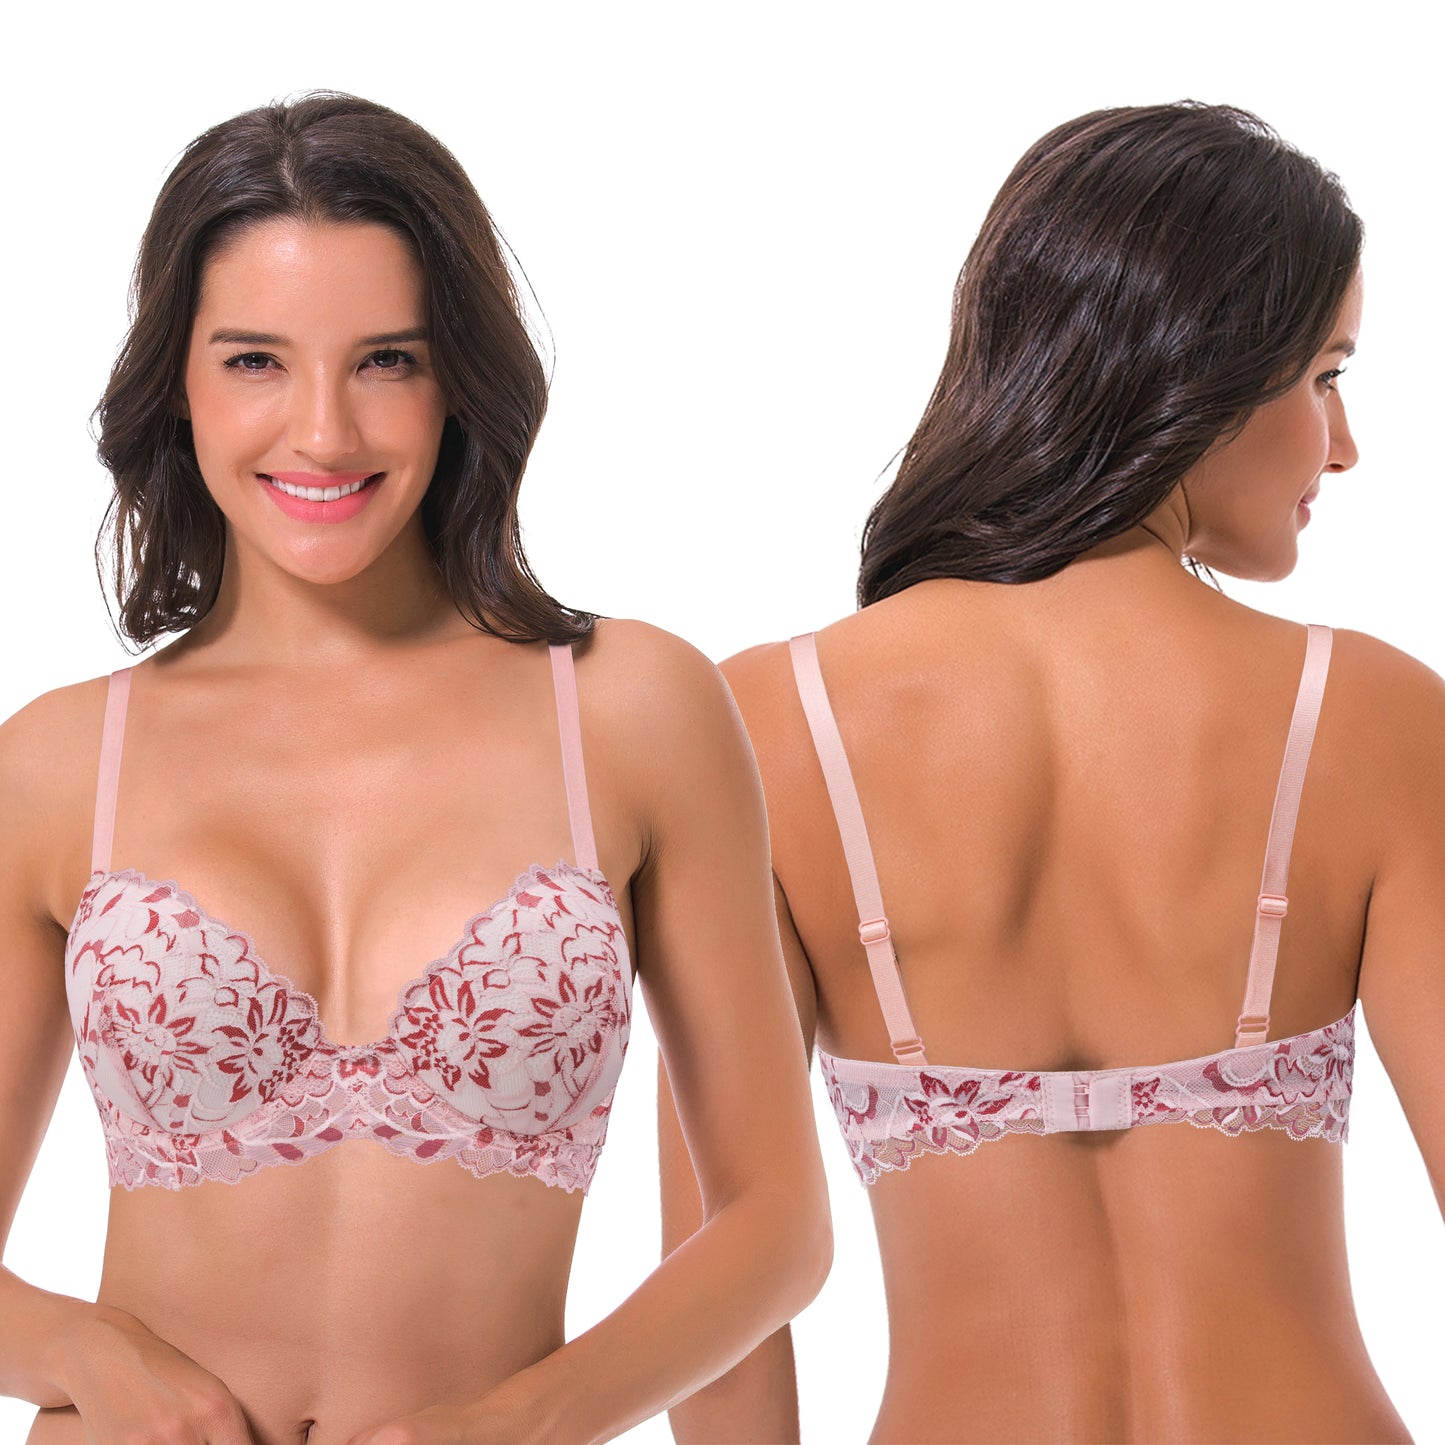 Women's Underwire Plus Size Push Up Add 1 and a Half Cup Lace Bras-2PK-White/Red,Black/Grey